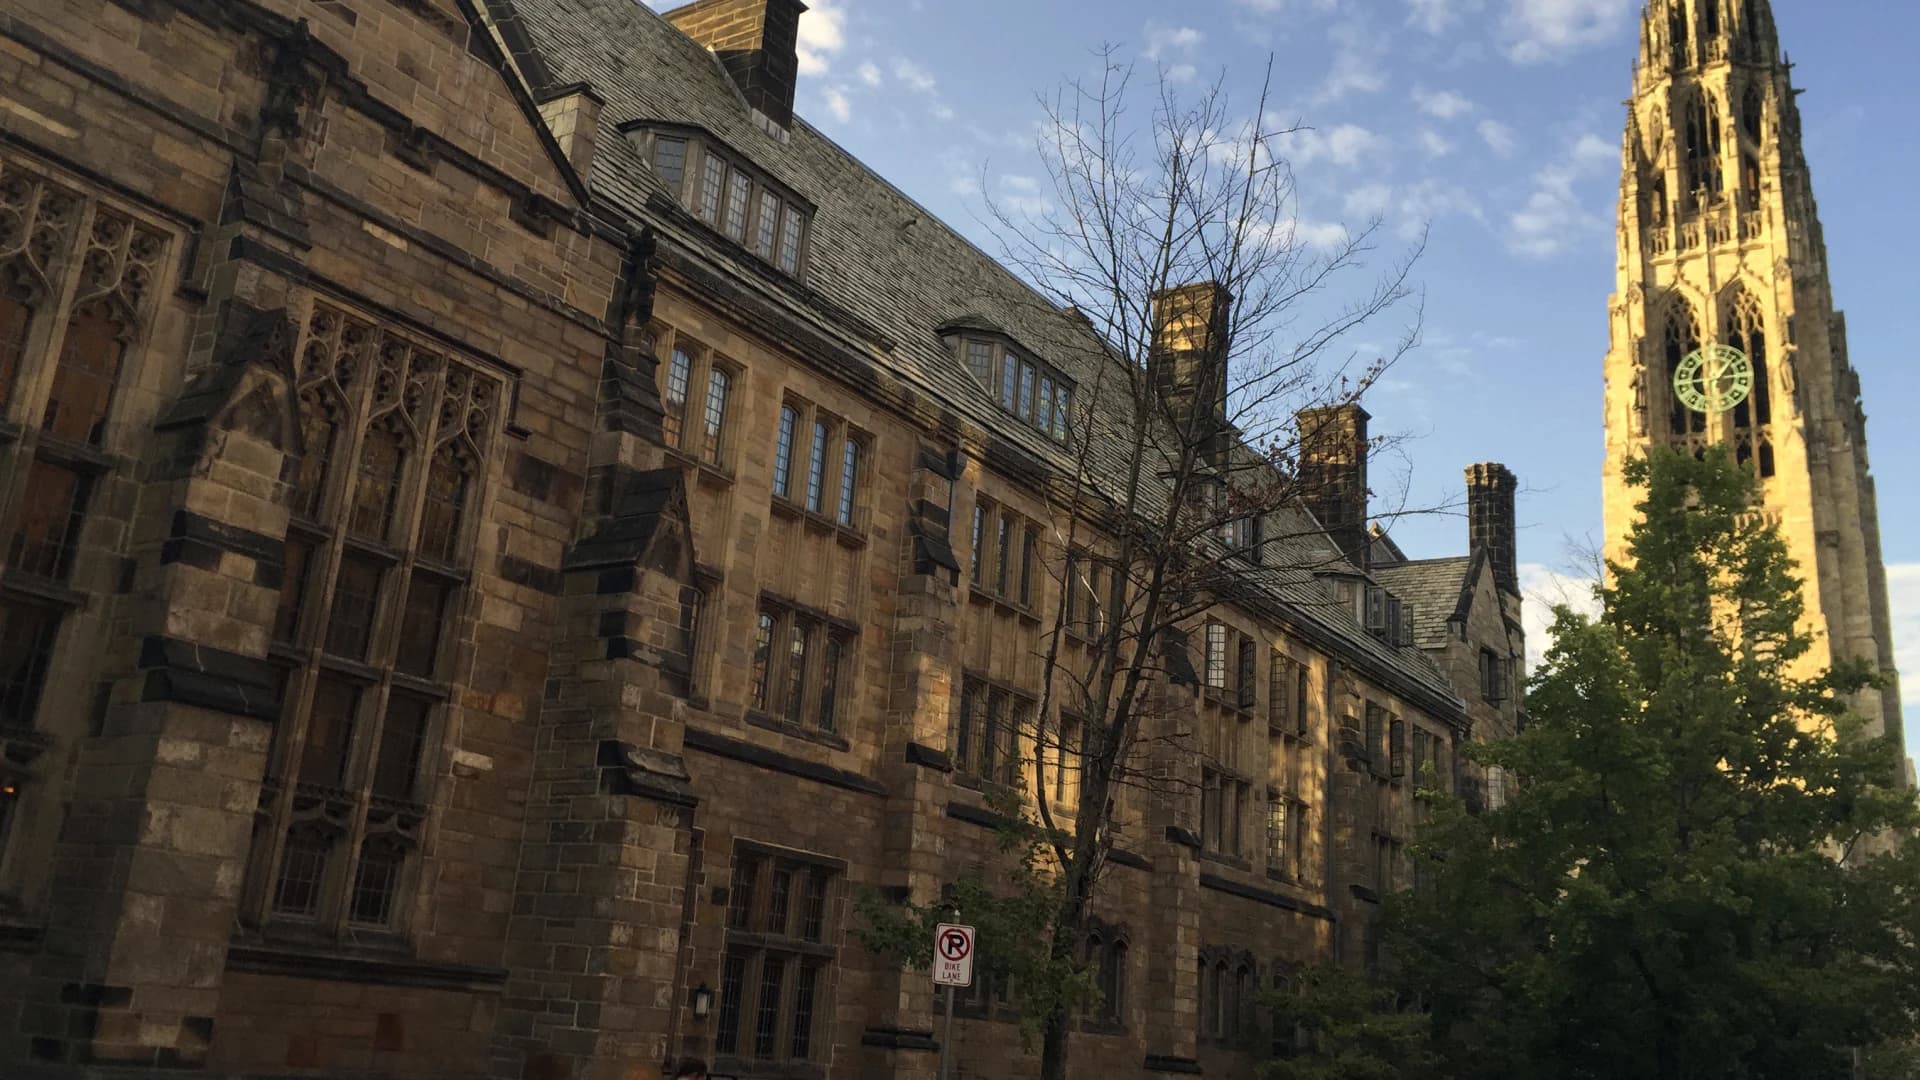 Yale reinstitutes mask requirement amid spike in COVID-19 cases